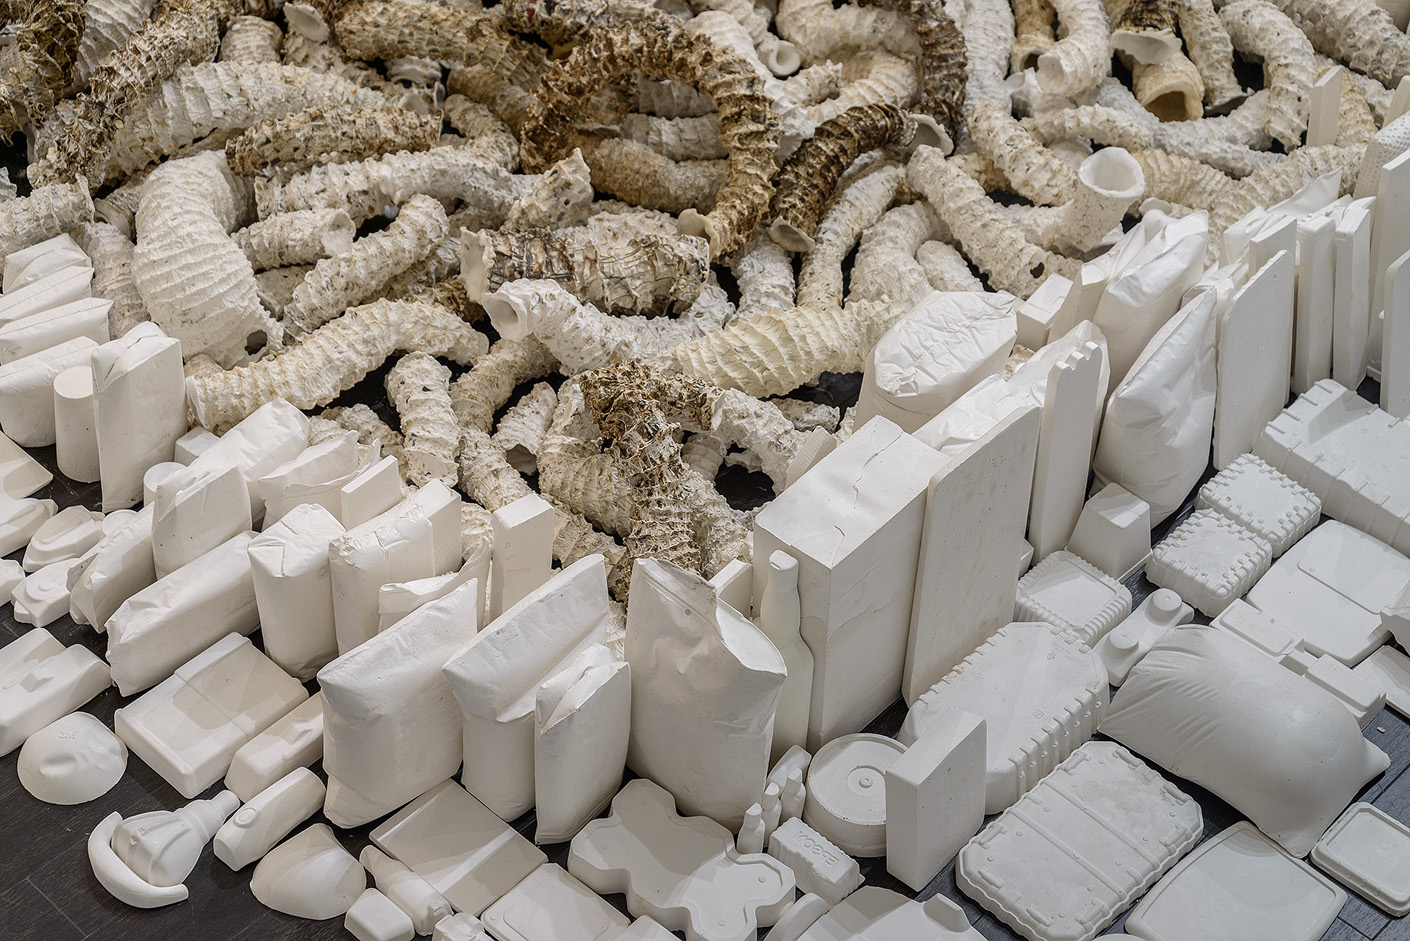   Seemingly Unconnected Events Cubed (V3)  2007- 2014 (ongoing)  DETAIL, Hundreds of plaster casts of organic forms interwoven and interconnected with consumer goods casts, 4 x 4 x 40” highest point  Installation at Epsten Gallery, Village Shalom, me